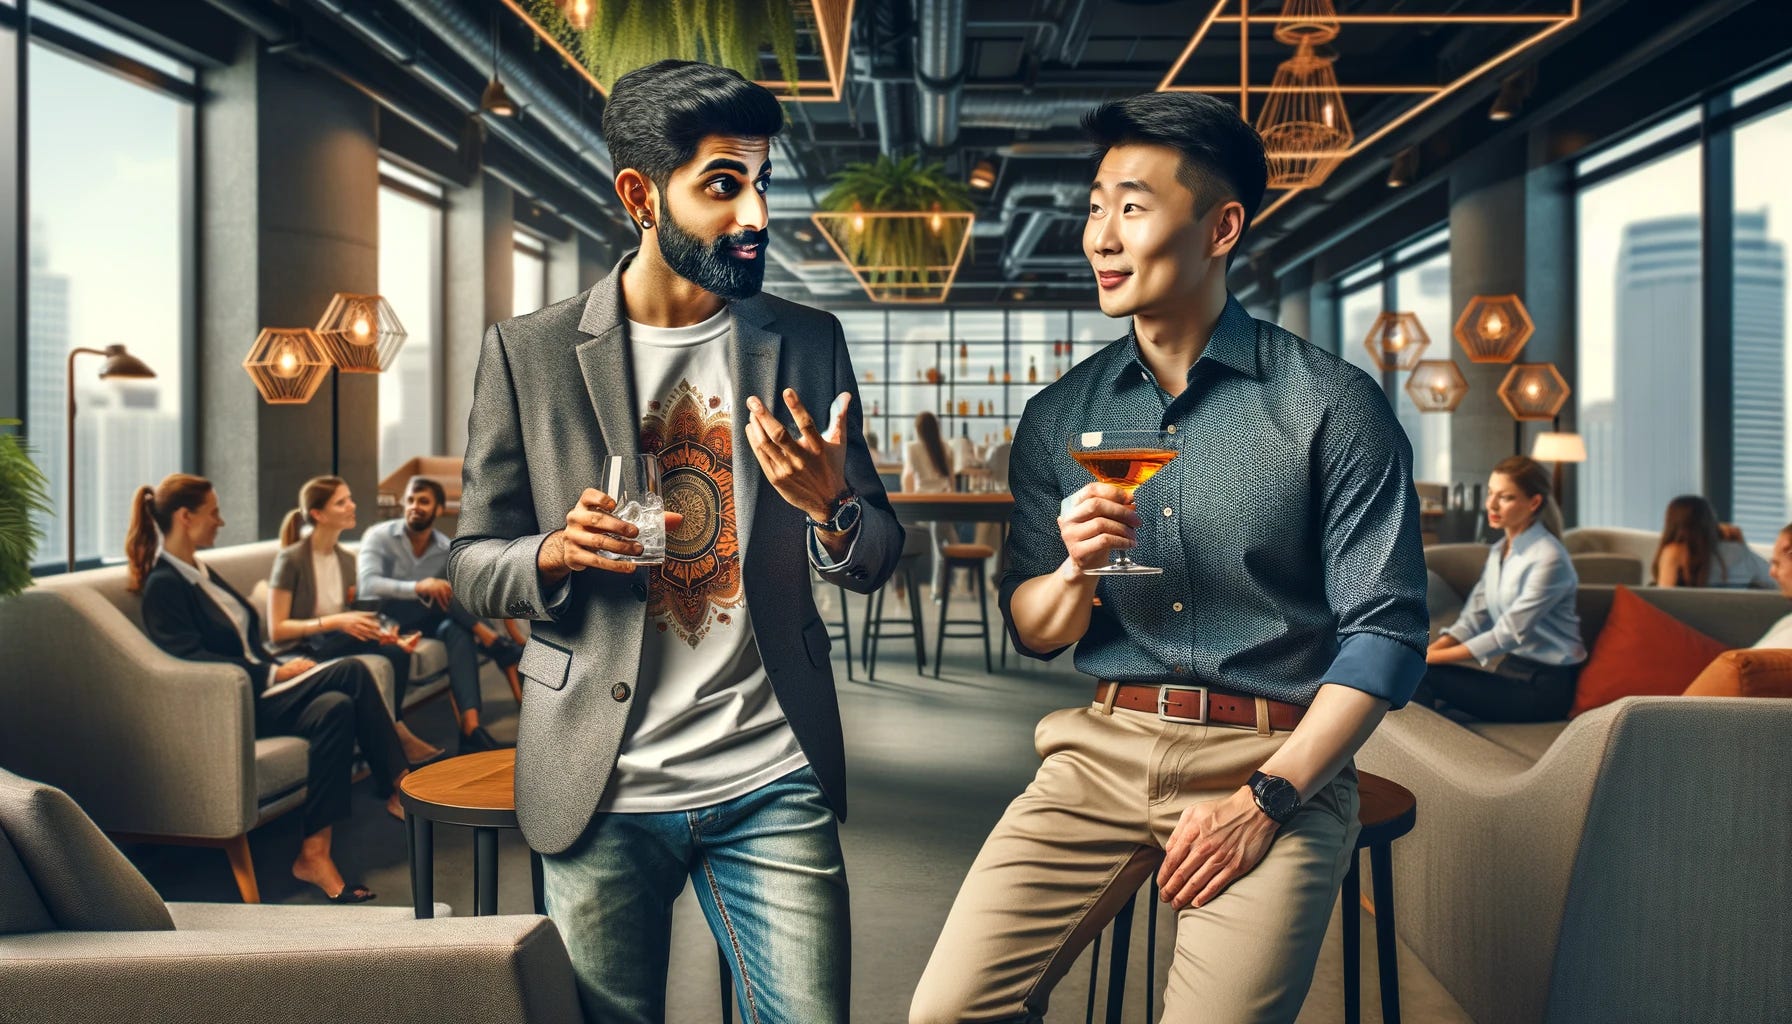 A landscape-oriented business happy hour scene in a modern office lounge, featuring two individuals in tech casual attire, one of Indian ethnicity and the other of Chinese ethnicity, each holding a drink. The Indian person, wearing a smart-casual blazer over a graphic t-shirt and jeans, is confidently explaining a concept with expressive hand gestures, holding a glass of wine. The Chinese person, dressed in a stylish, casual button-up shirt and chinos, is attentively listening, showing interest and curiosity, holding a cocktail. The wider view includes more of the stylish office environment, with comfortable seating, ambient lighting, and a glimpse of the bustling activity in the background.